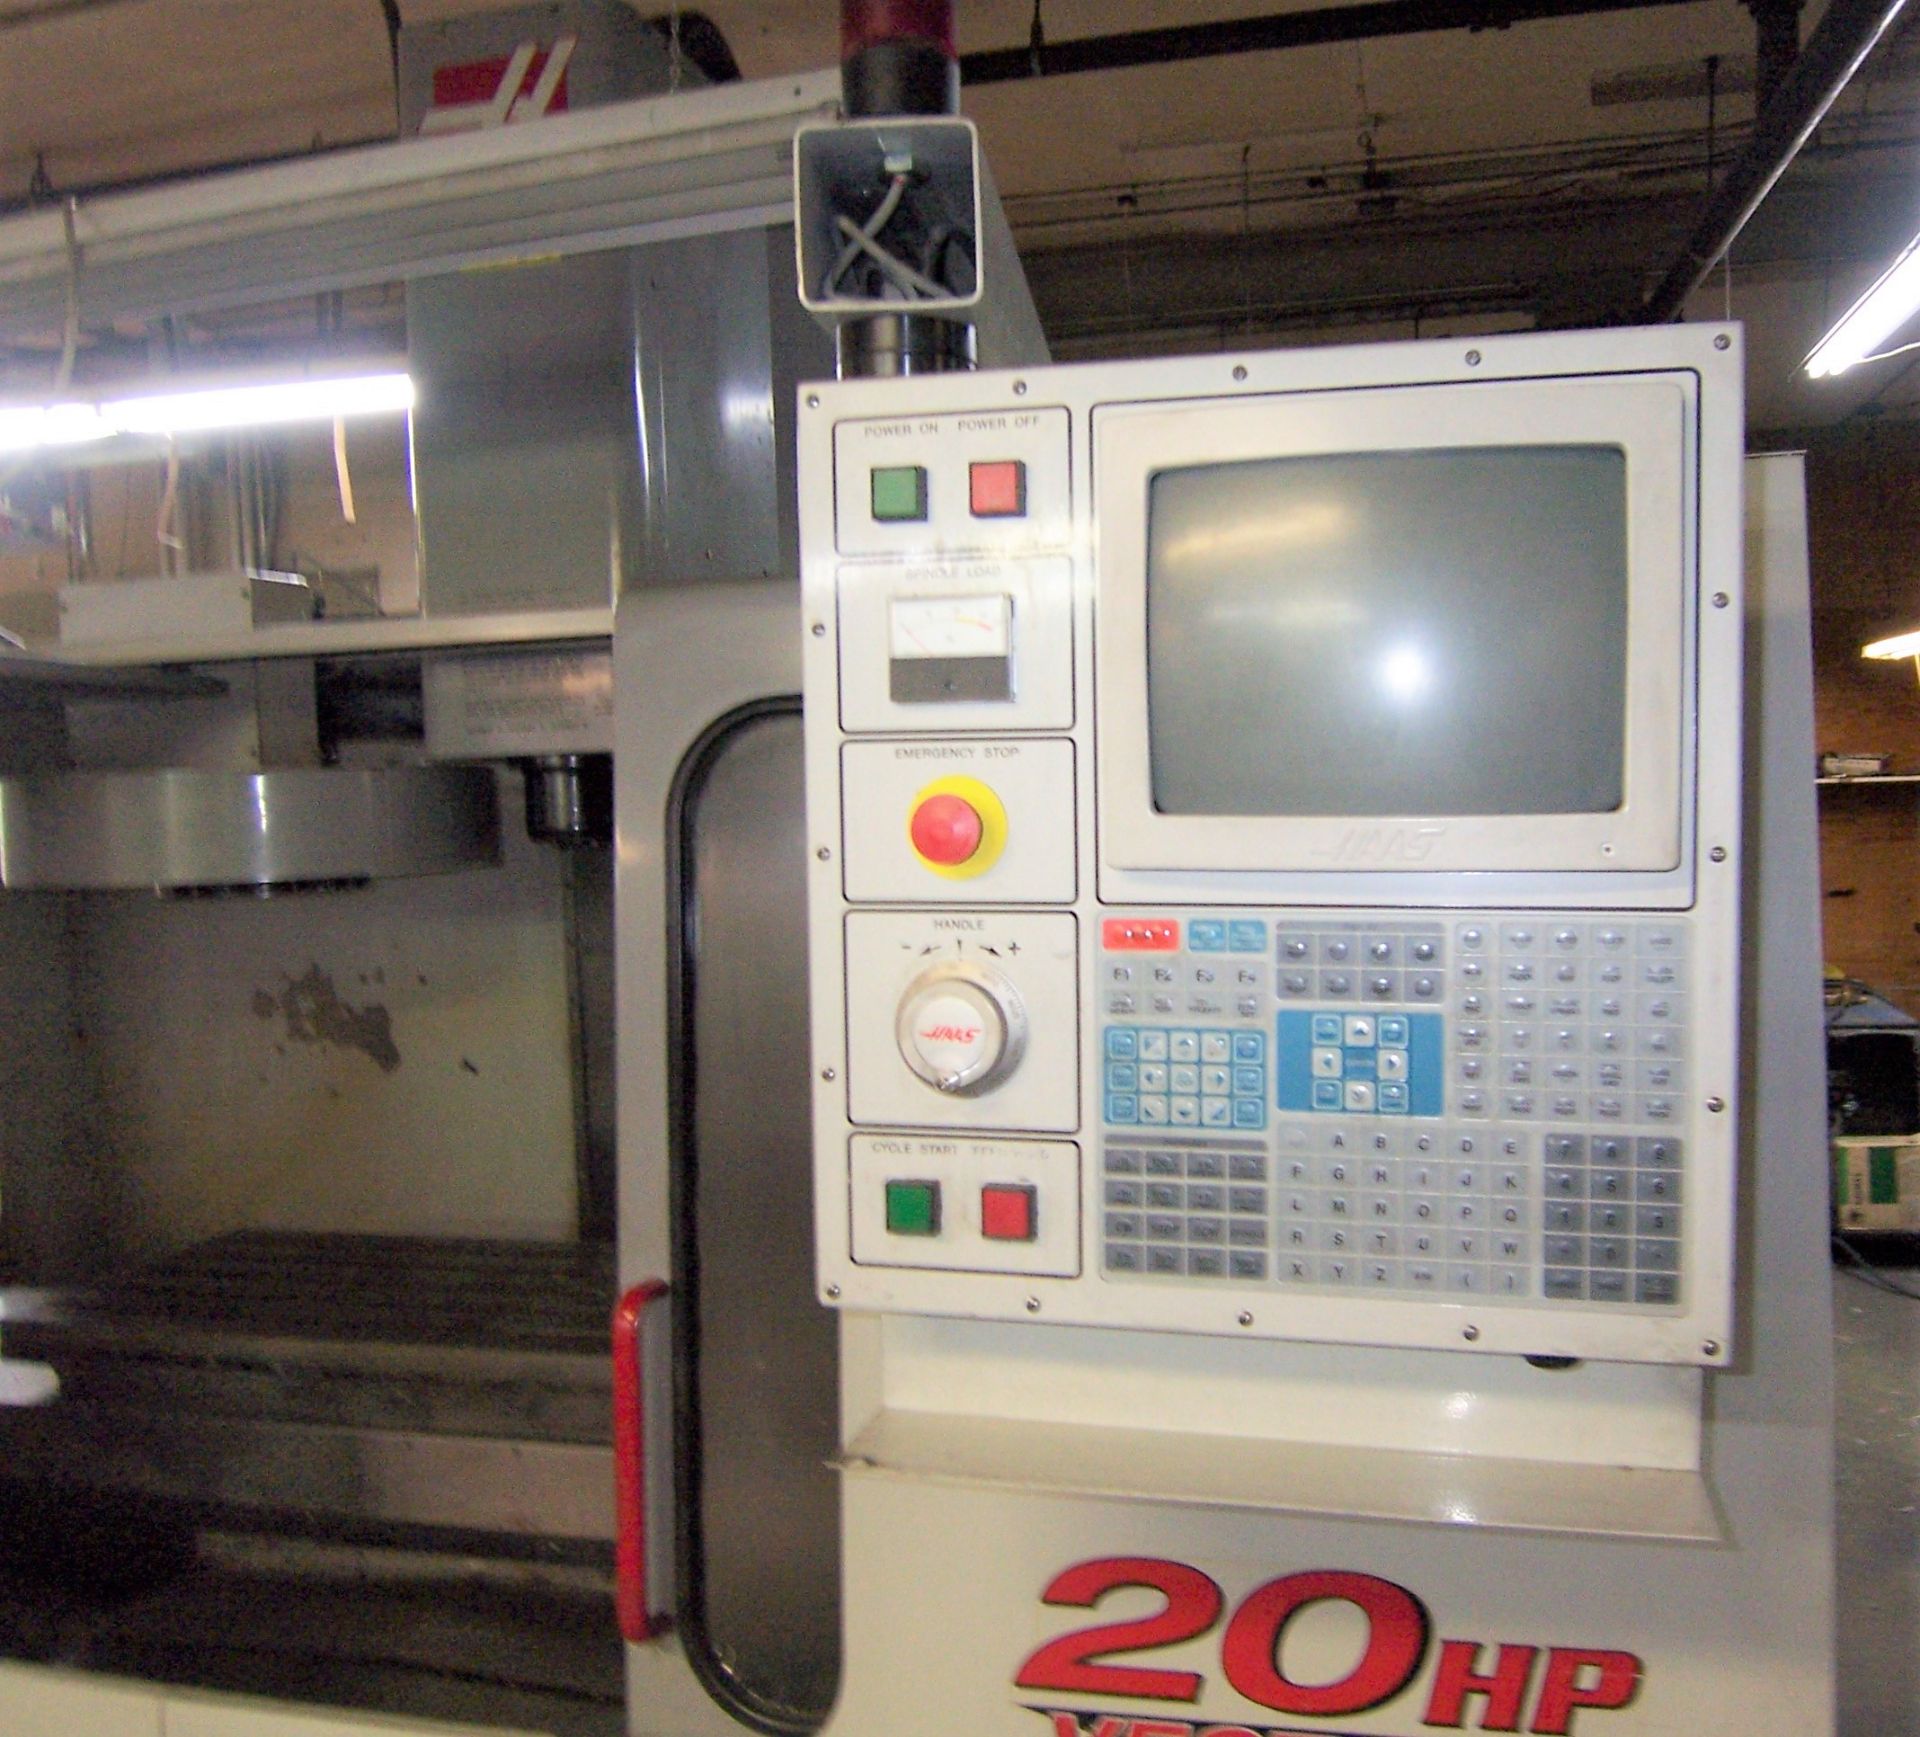 HAAS MDL. VF4 CNC VERTICAL MACHINING CENTER WITH 20-POSITION AUTOMATIC TOOL CHANGER, 20 HP VECTOR - Image 4 of 5